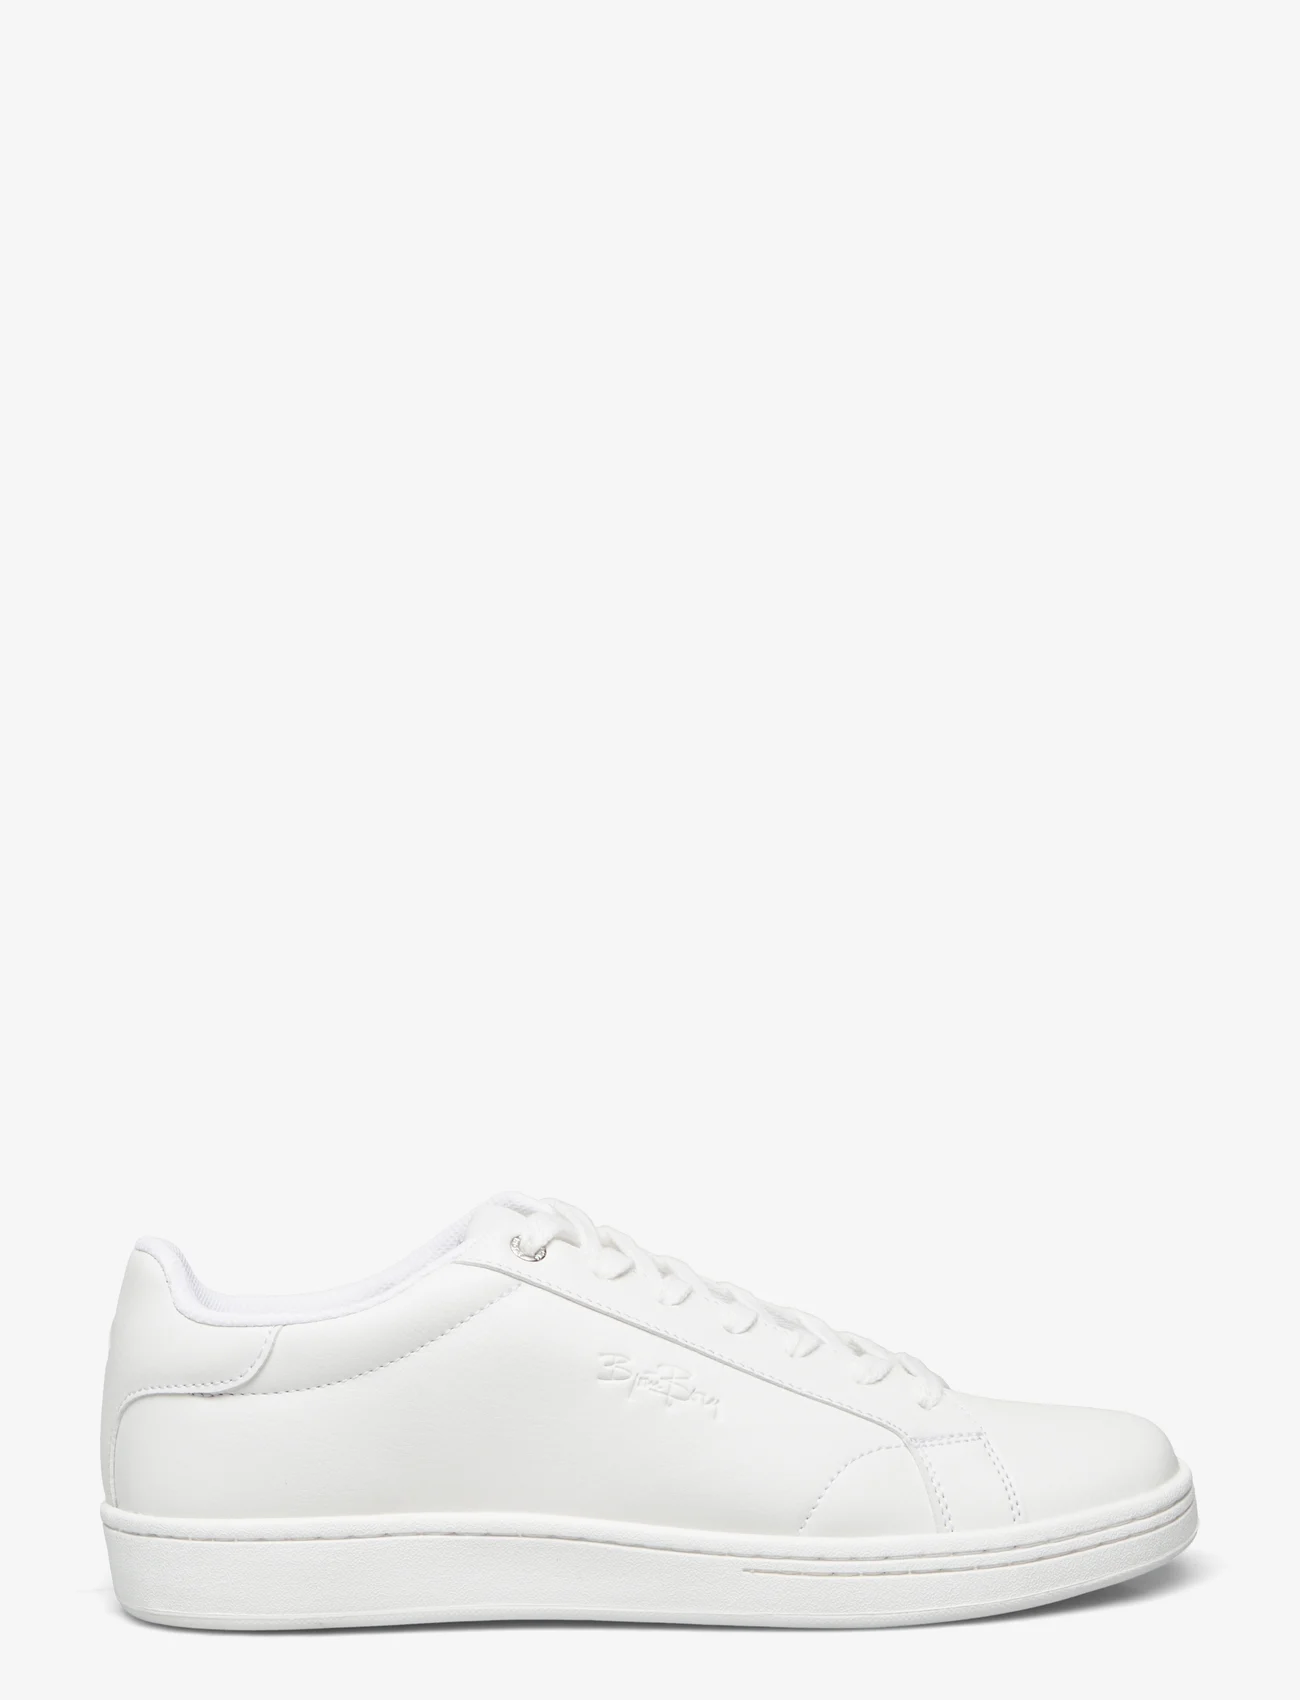 Björn Borg - T450 SIG EMB M - lave sneakers - wht-wht - 1